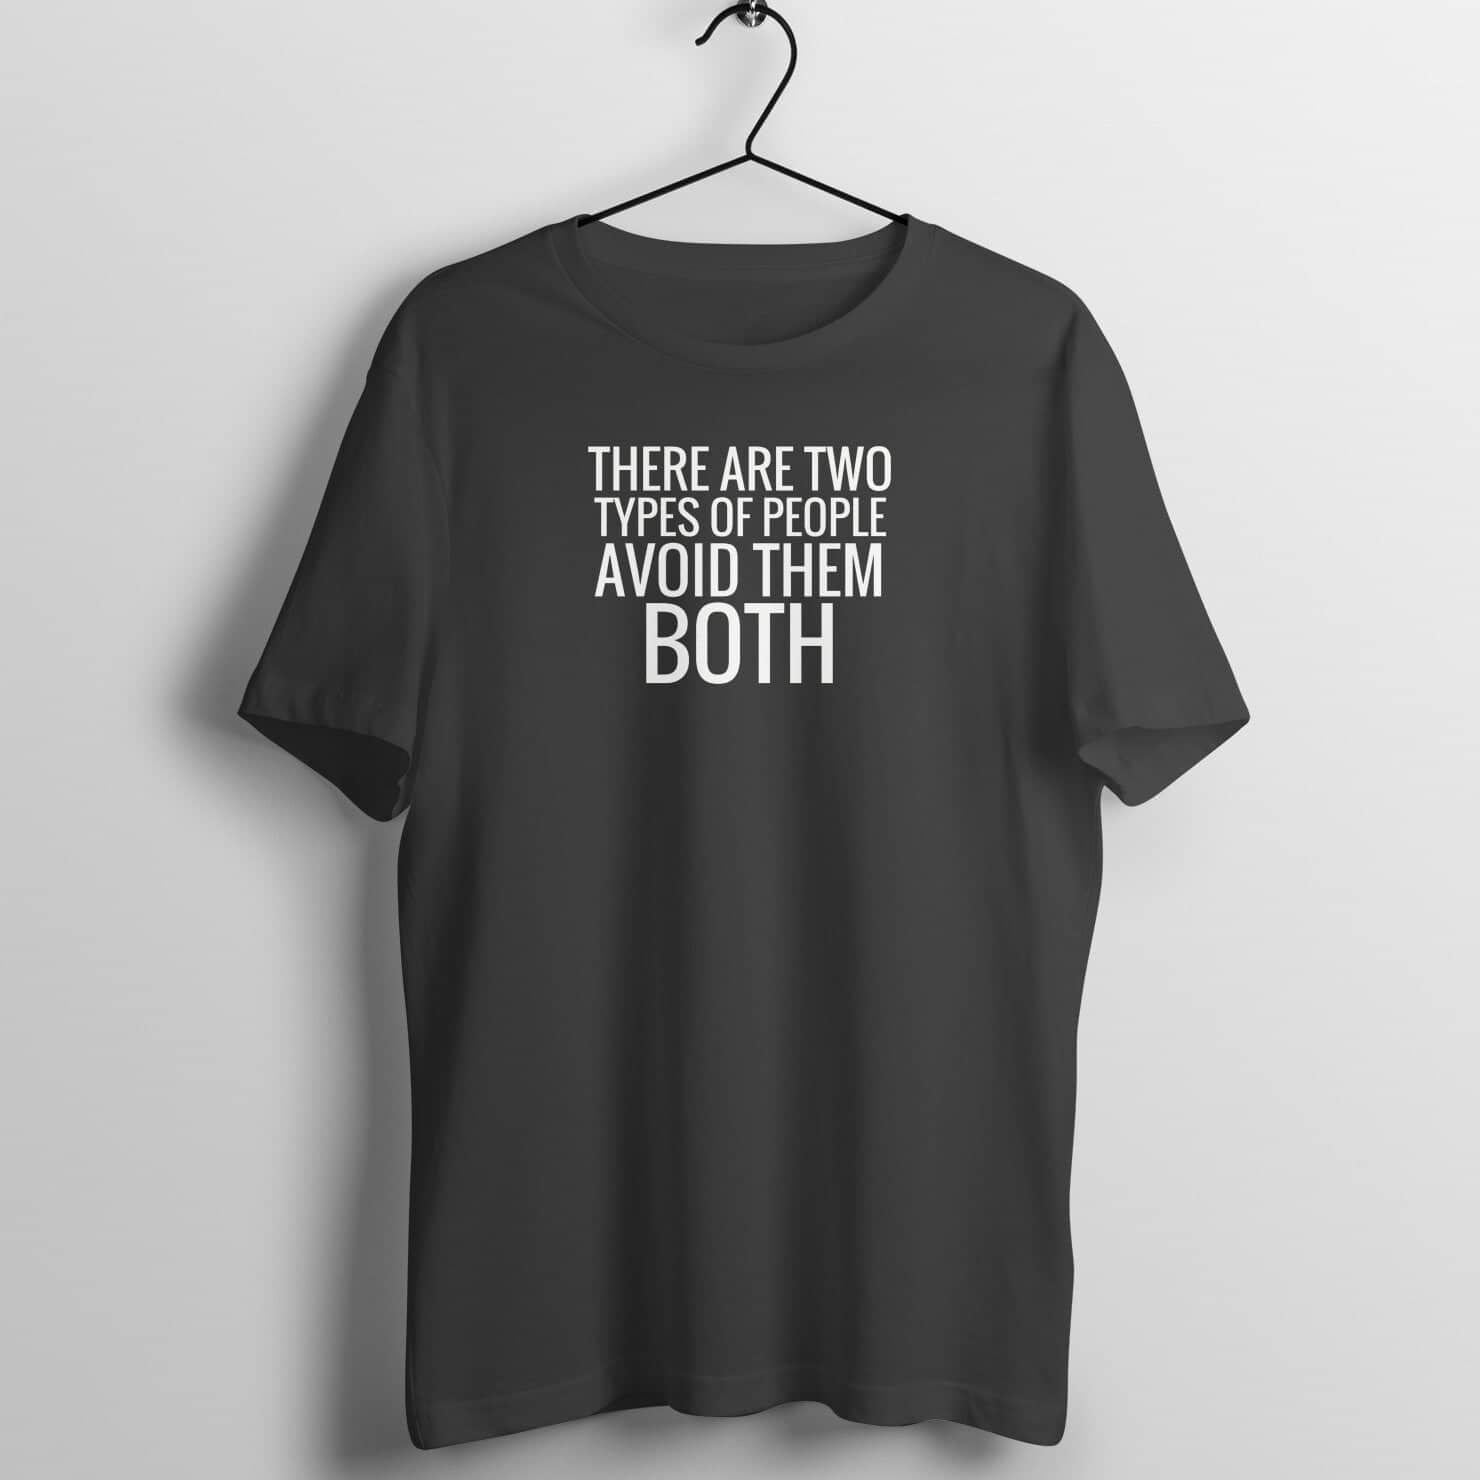 There are two Types of People Funny Black T Shirt for Men and Women Printrove Black S 